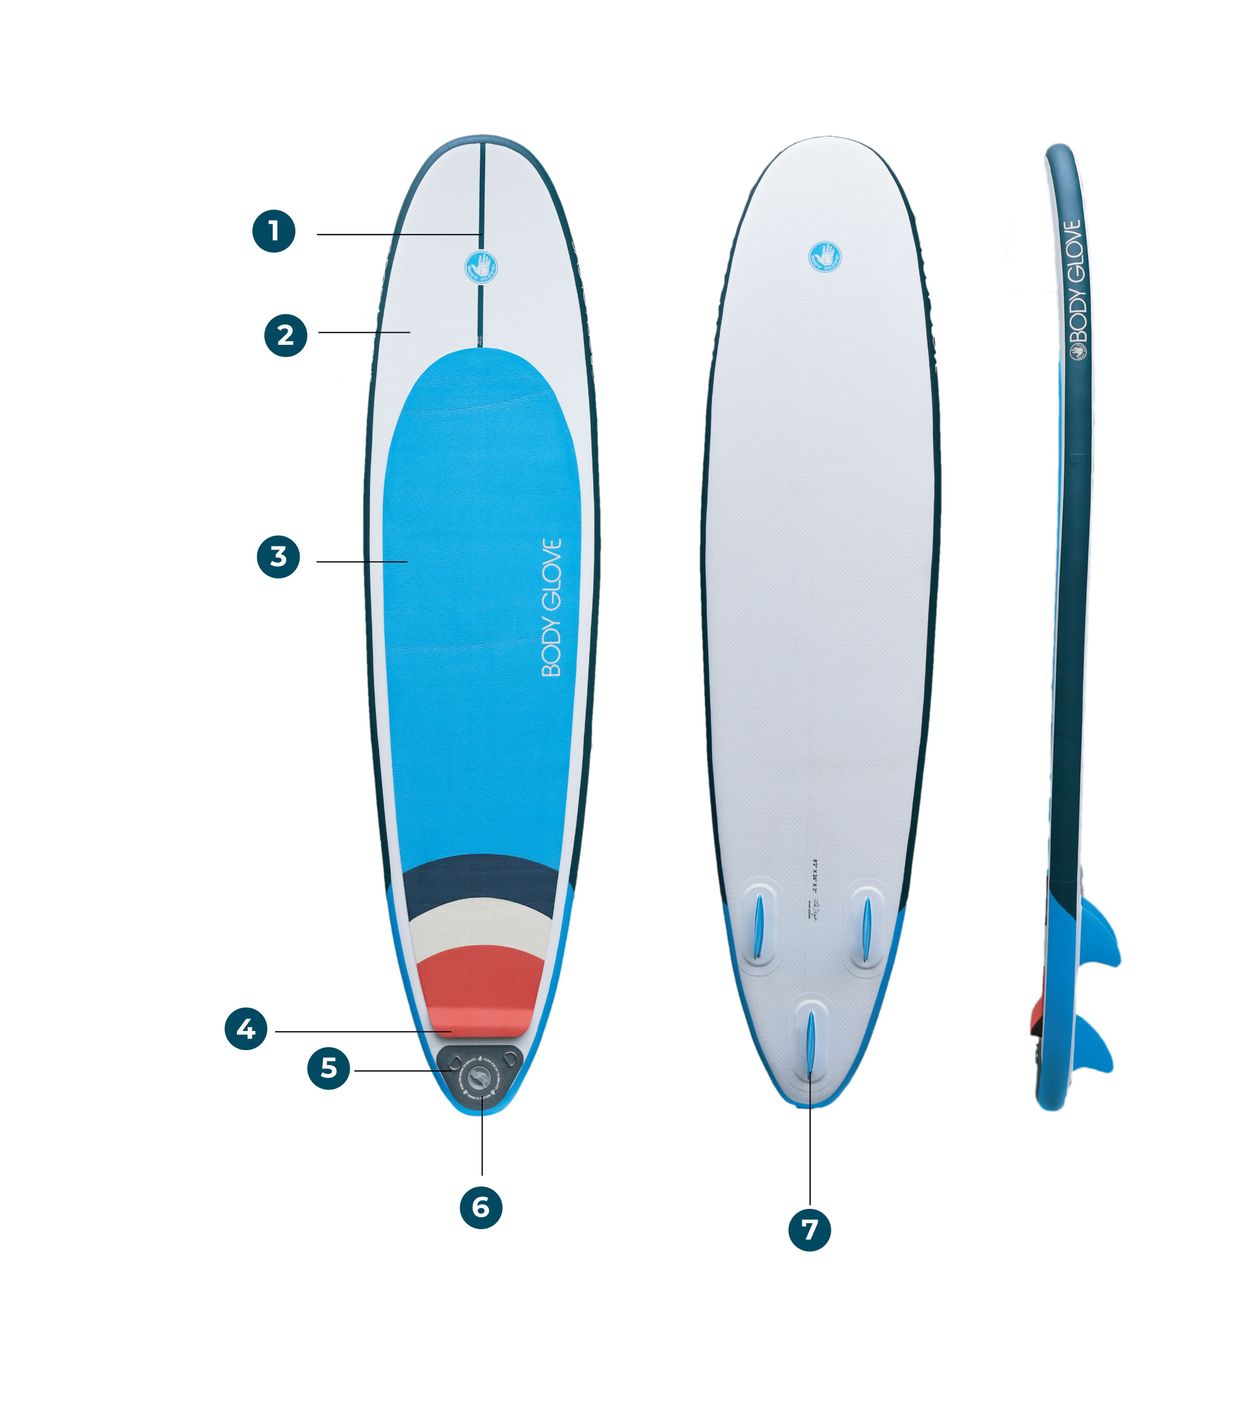 Body Glove EZ8 Surf Board Inflatable Surfboard, New In Box 20 PSI